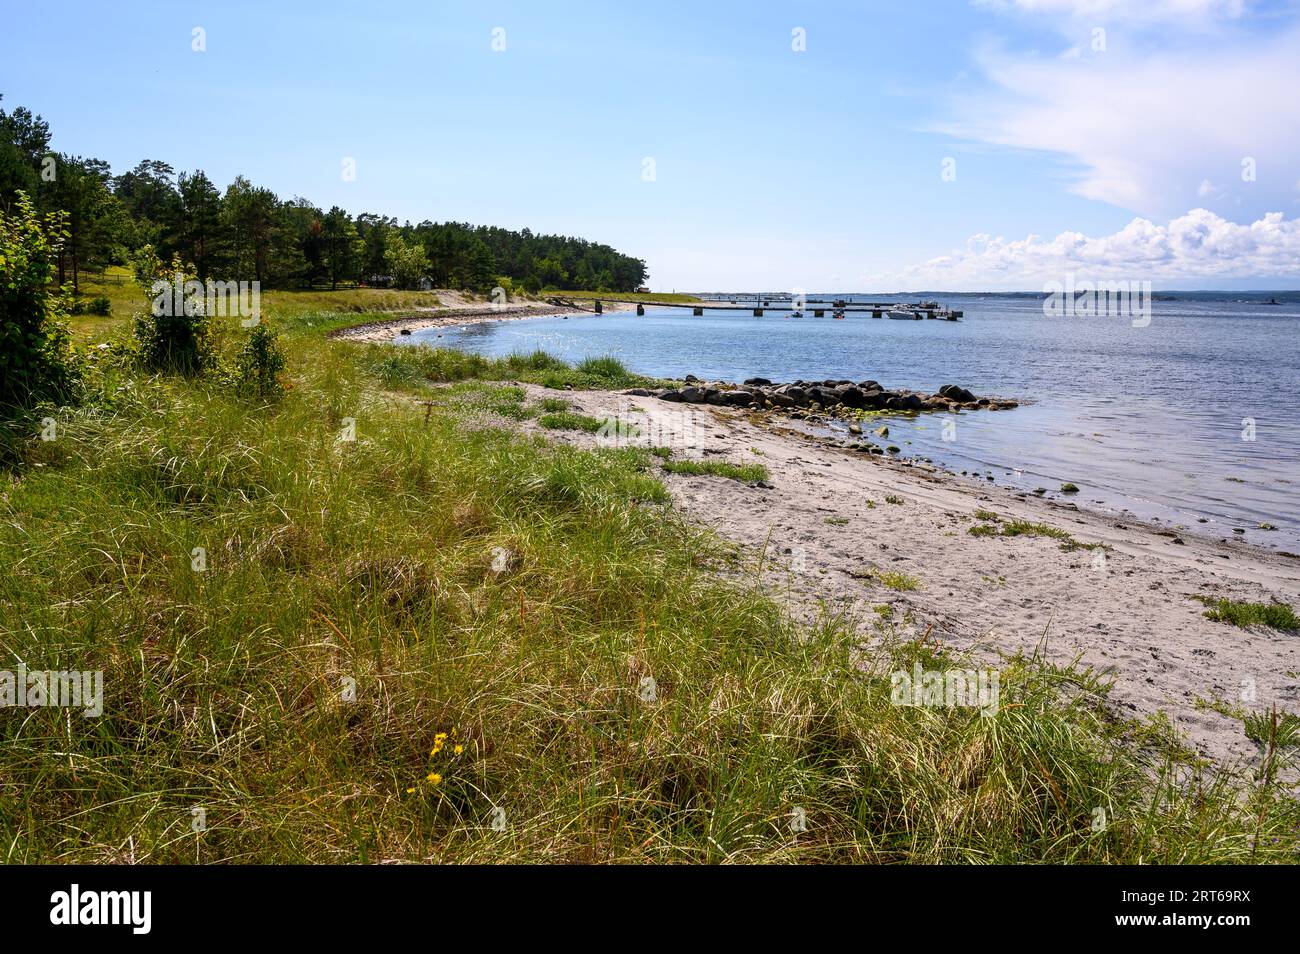 The inside of the long and narrow Jomfruland island in the Kragero archipelago has sandy beaches. Telemark county, Norway. Stock Photo